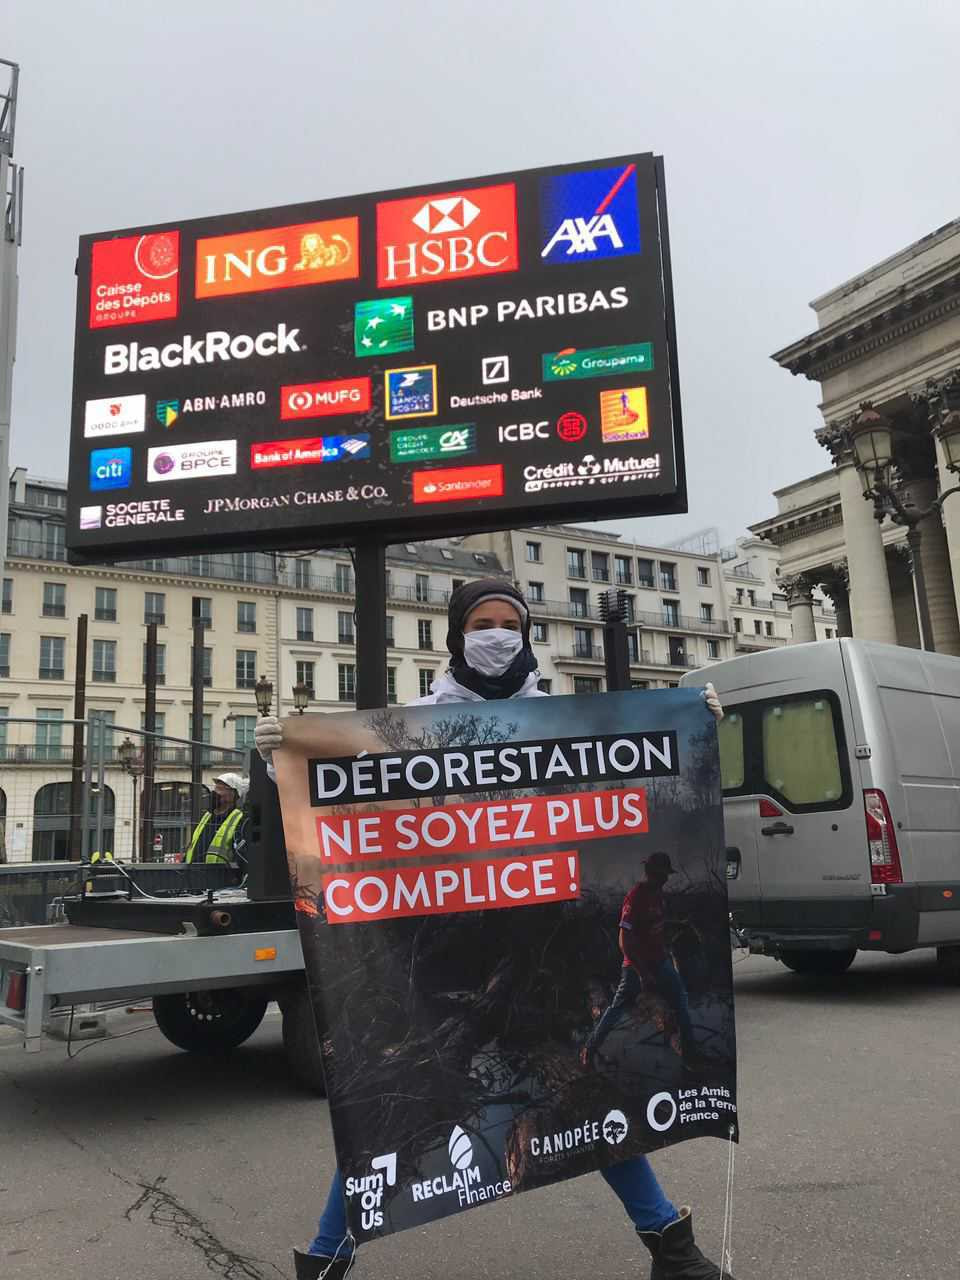 Activist holding a banner "Deforestation: Stop complicity", in front of the billboard broadcasting the names of the financial actors involved.